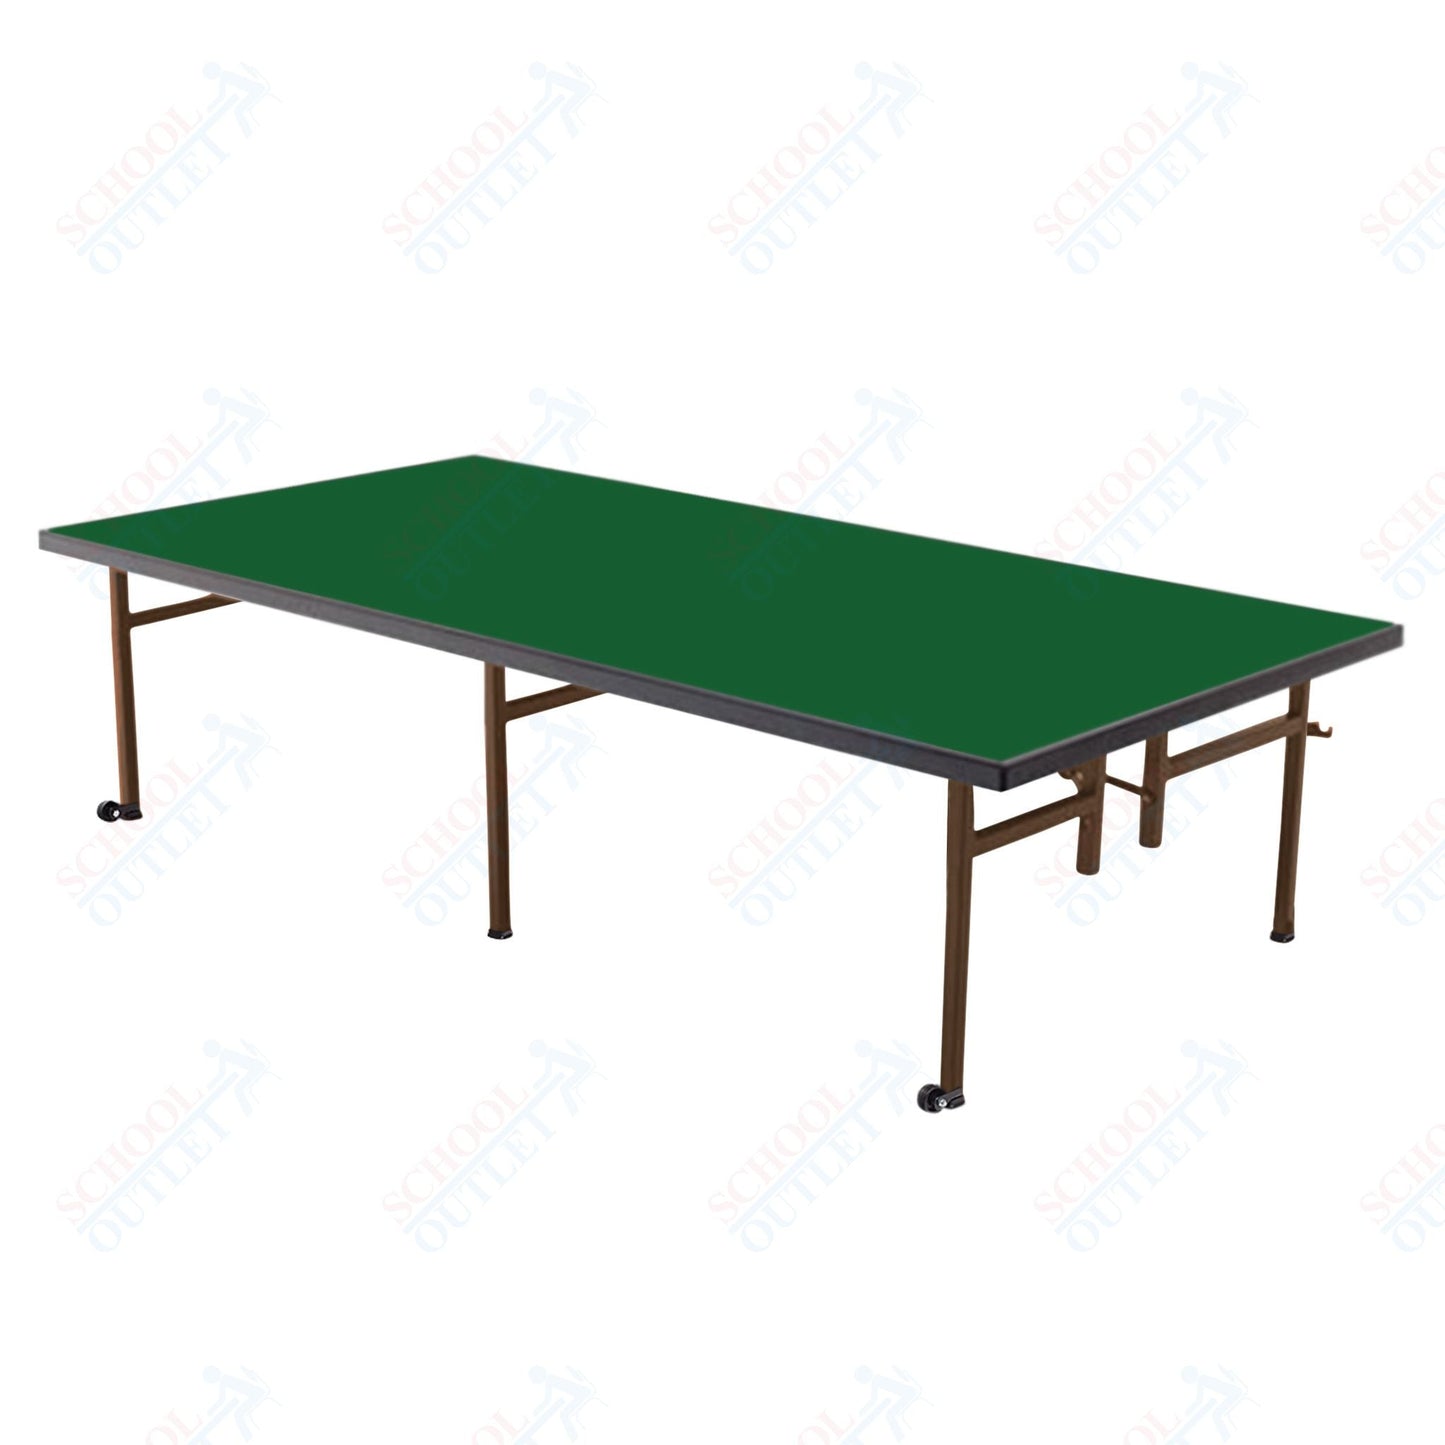 AmTab Fixed Height Stage - Carpet Top - 48"W x 48"L x 8"H (AmTab AMT - ST4408C) - SchoolOutlet